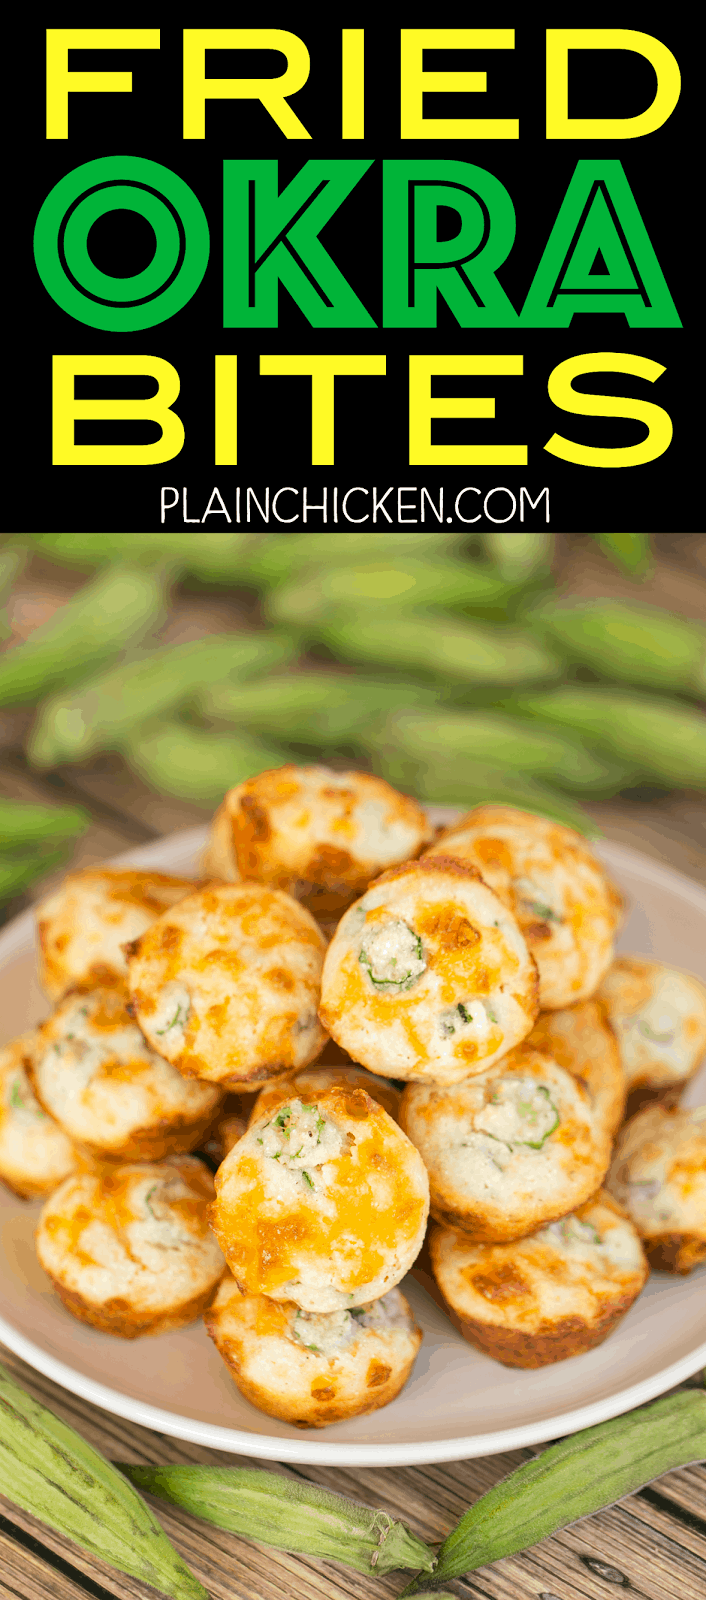 Fried Okra Bites - OMG! SO good! Quick homemade cornbread muffins with cheese and fresh okra. Great for parties and an easy side dish. Only 5 ingredients - self-rising cornmeal, buttermilk, oil, cheddar cheese, fresh okra. Ready in about 10 minutes!!